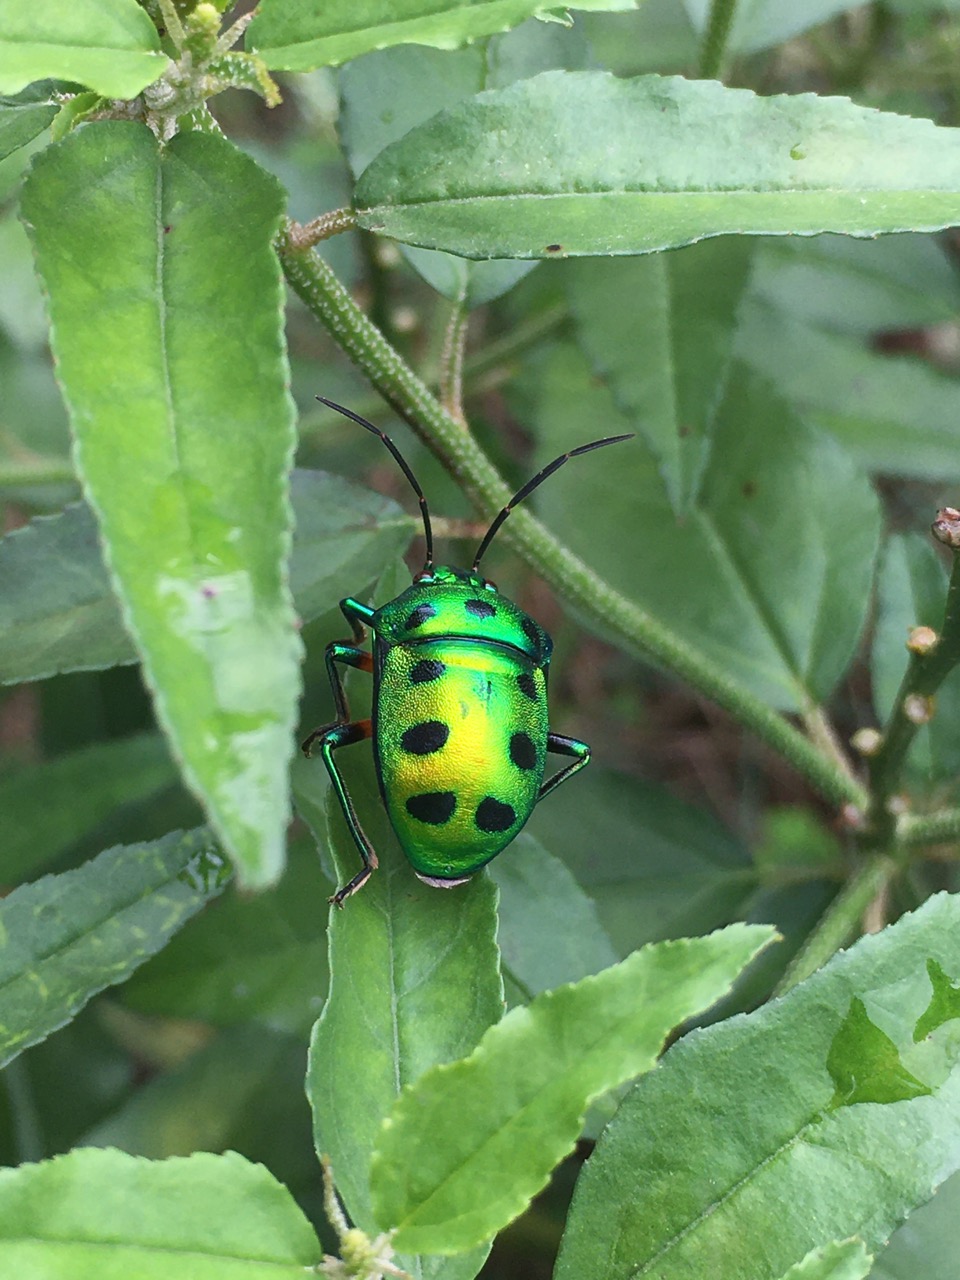 Jewel beetle, next to restored Puducherry Keni pond lake, outside Chennai, Tamil Nadu, India. Restoration work by local NGO Care Earth Trust. Photo by Erica Gies.